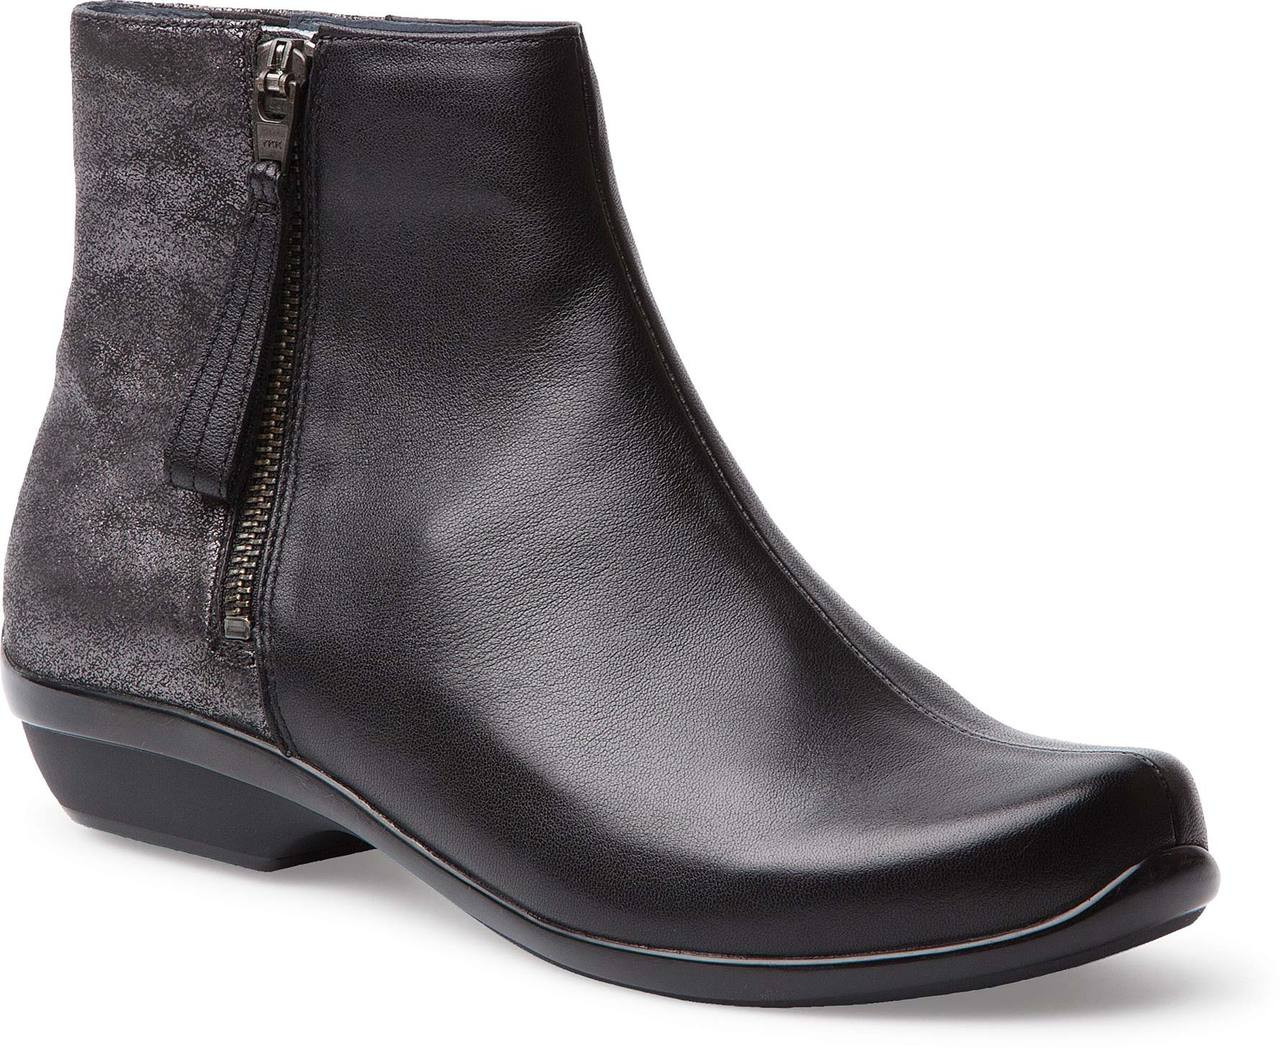 Dansko Otis - FREE Shipping & FREE Returns - Ankle Boots, Casual Boots